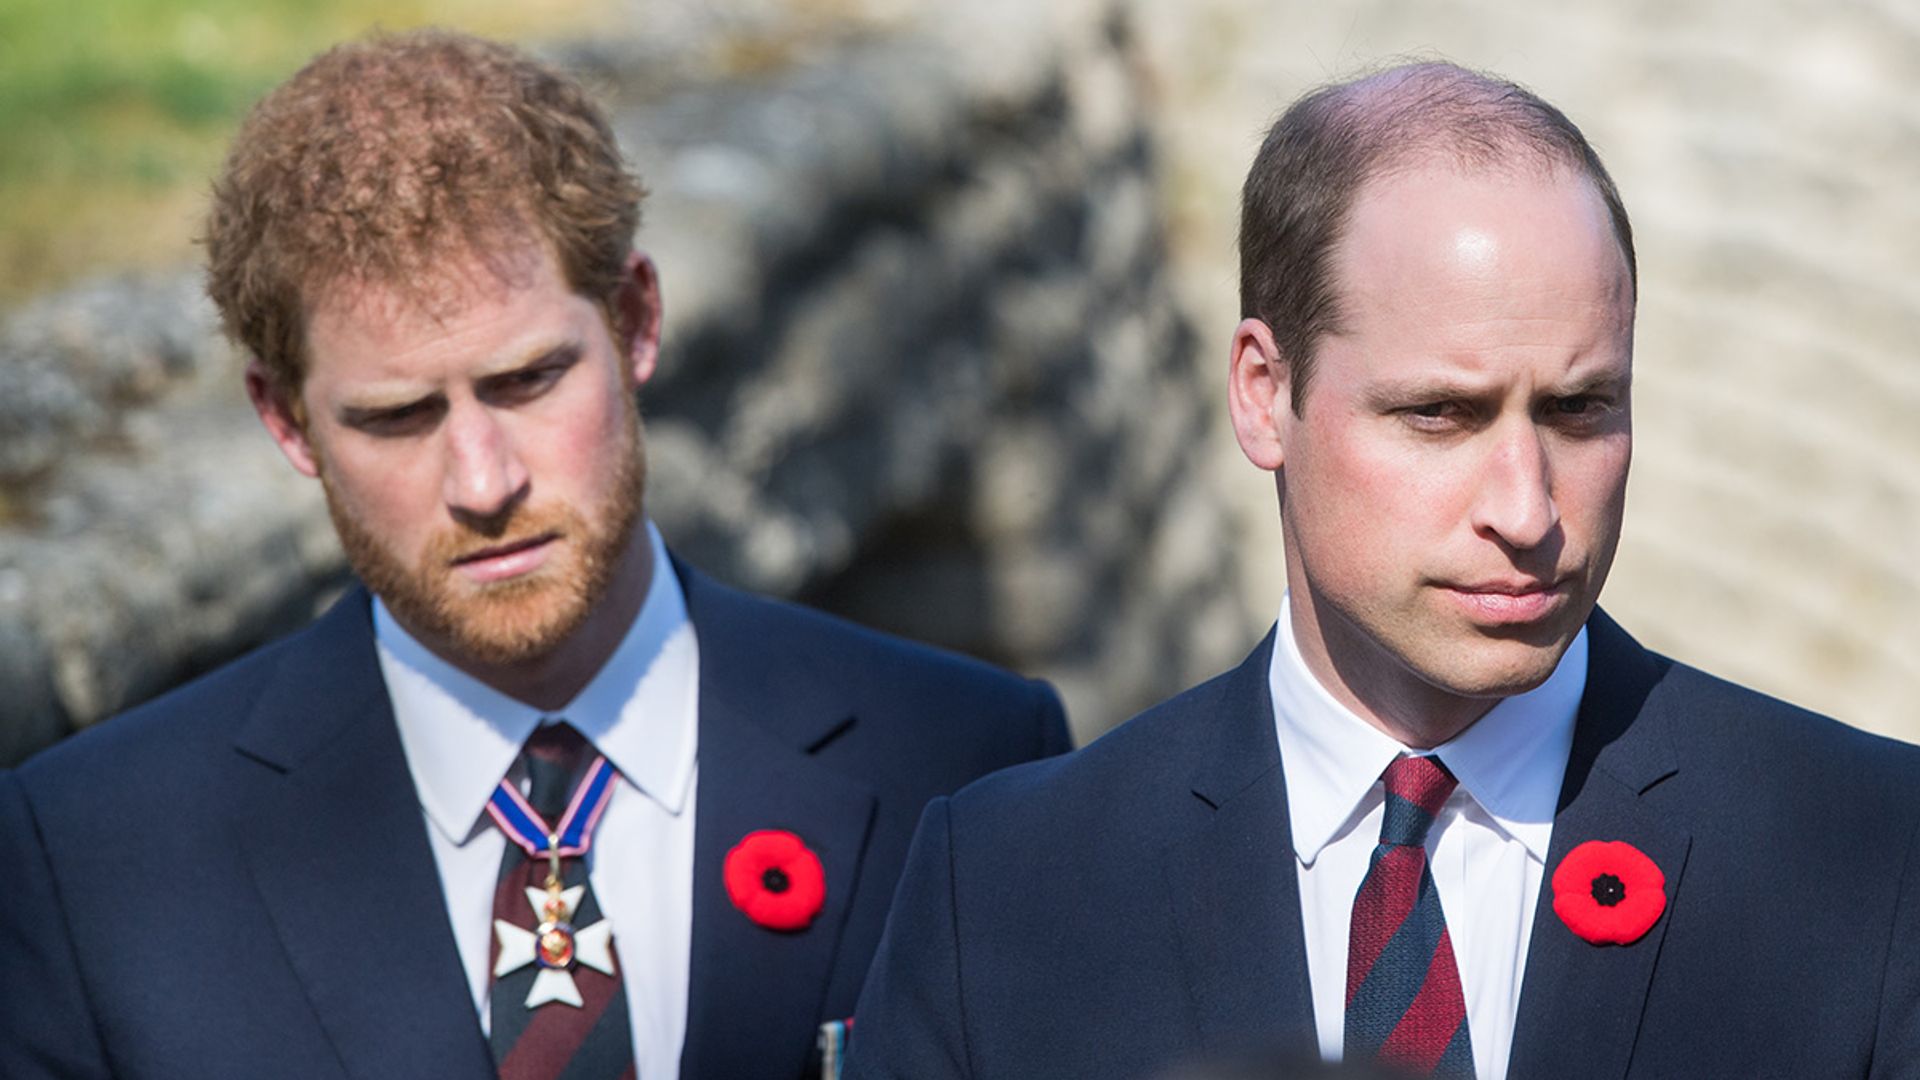 Princes William and Harry to walk alongside cousin Peter Phillips at funeral procession